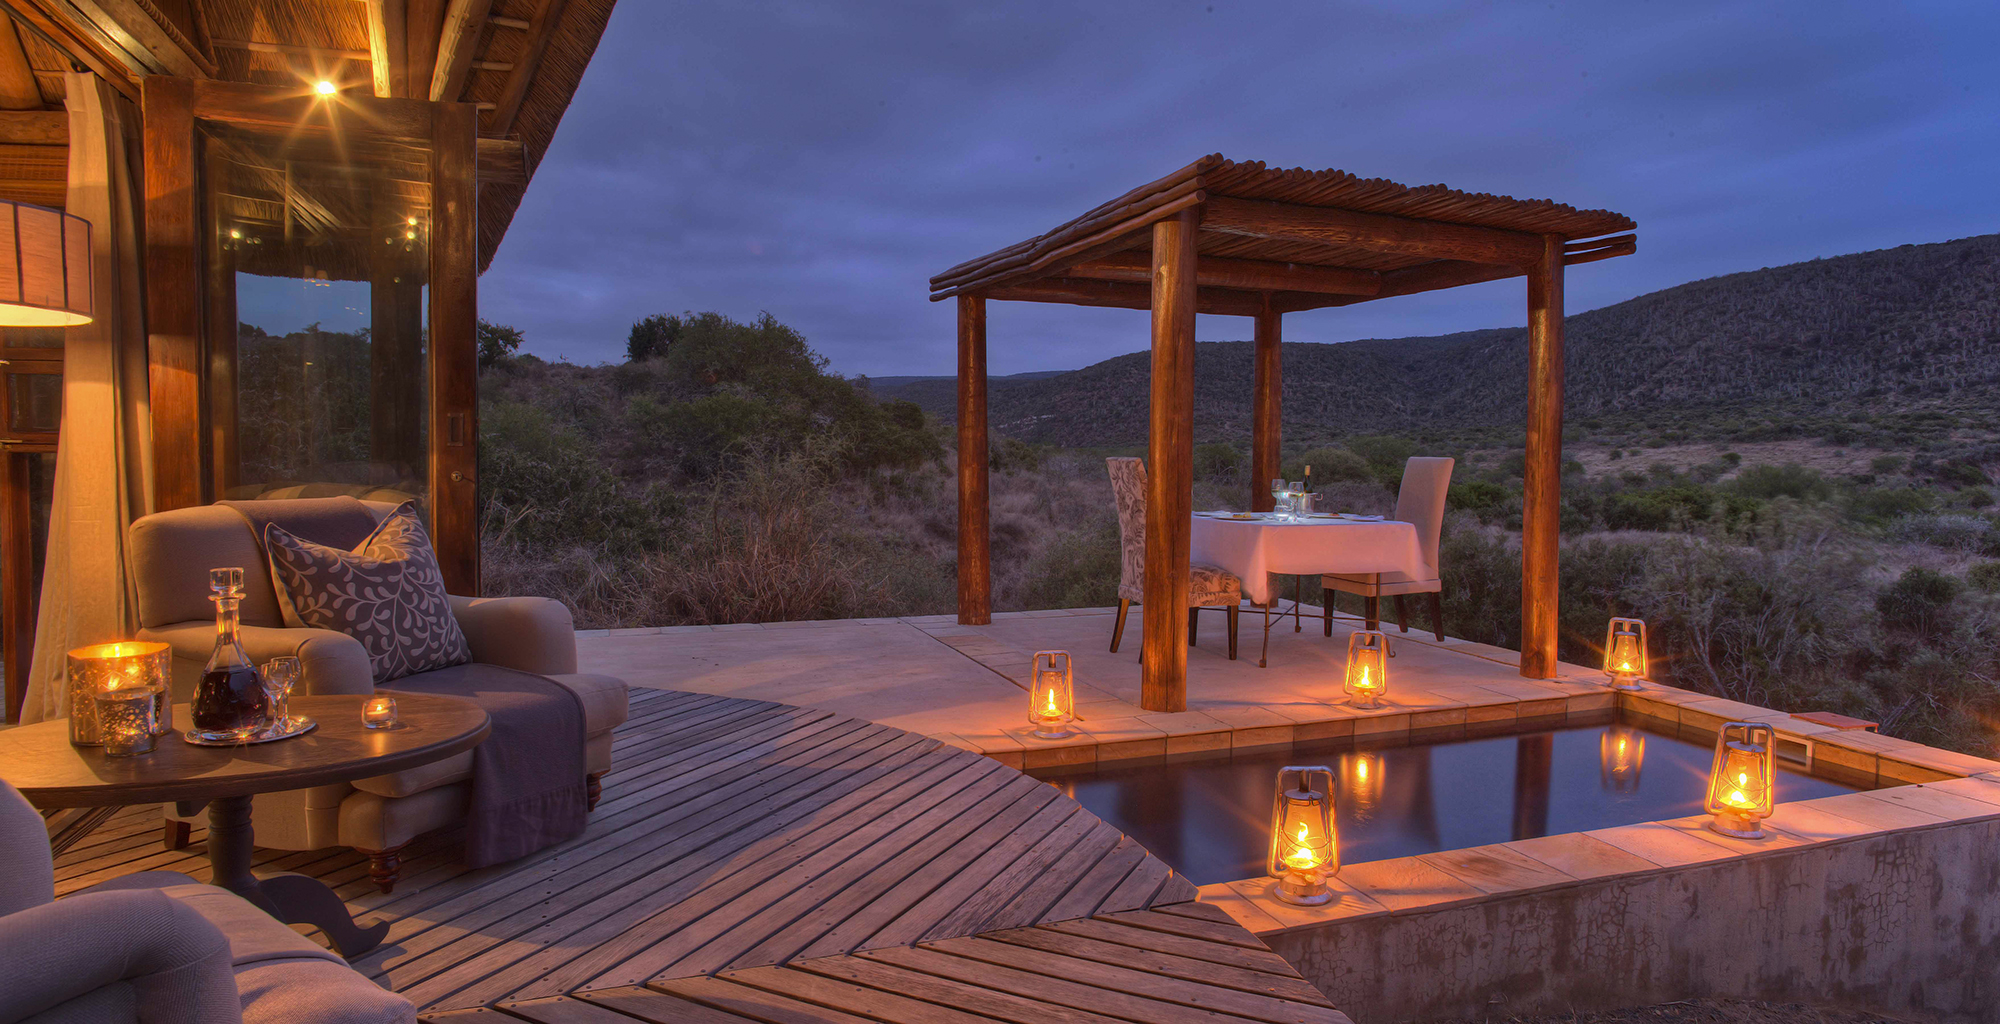 South-Africa-Great-Fish-River-Lodge-Deck-Pool